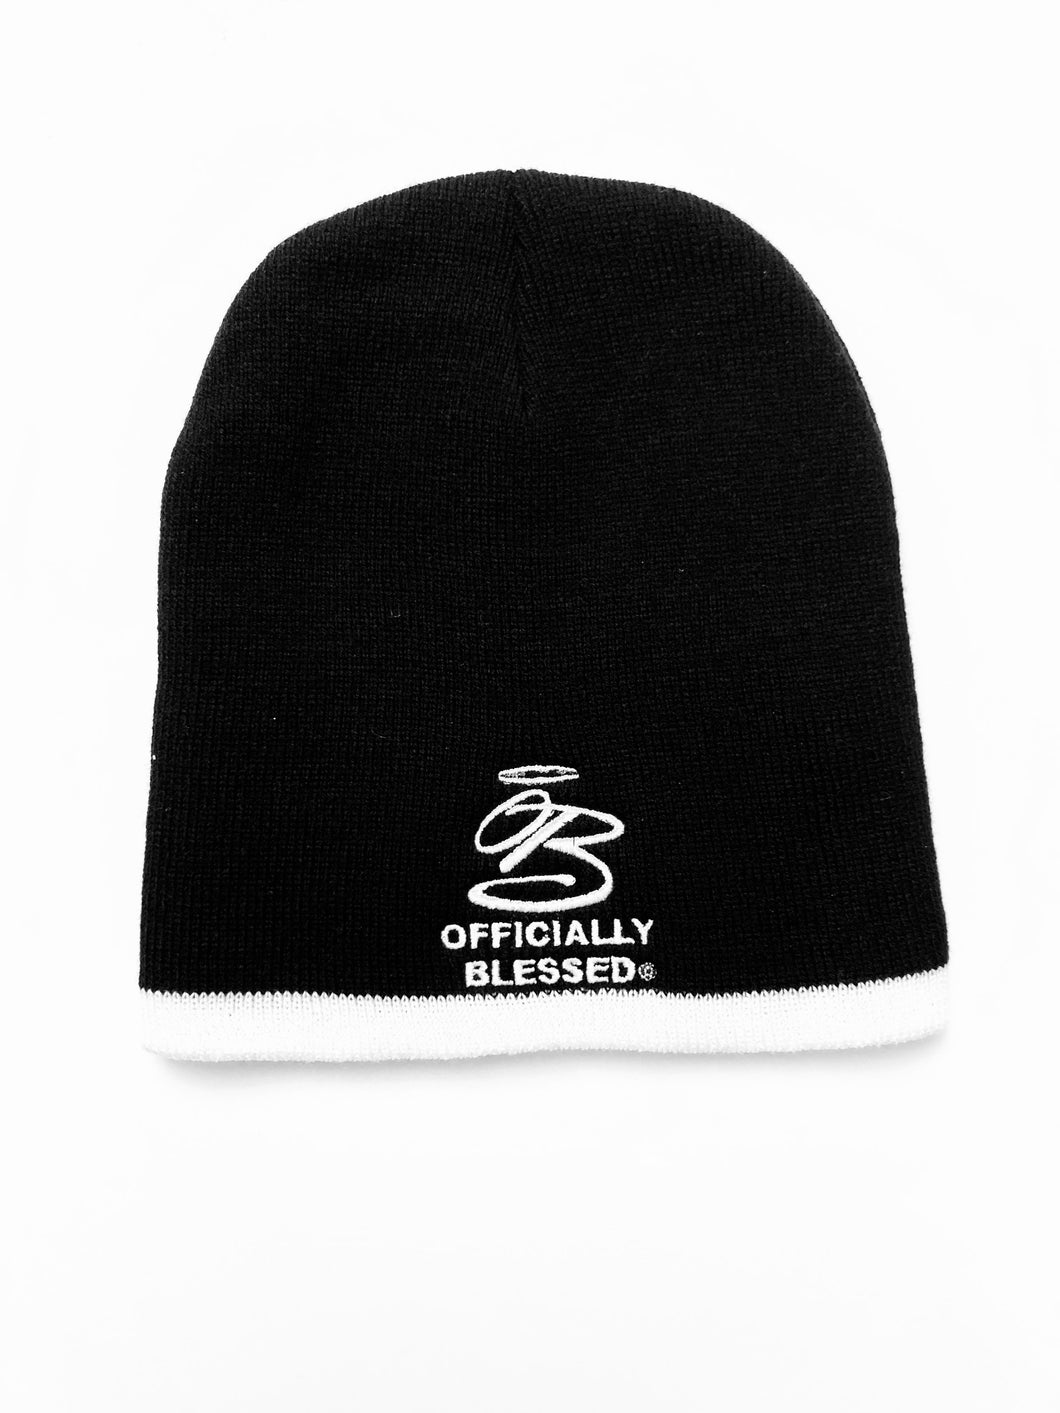 Officially Blessed Beanie